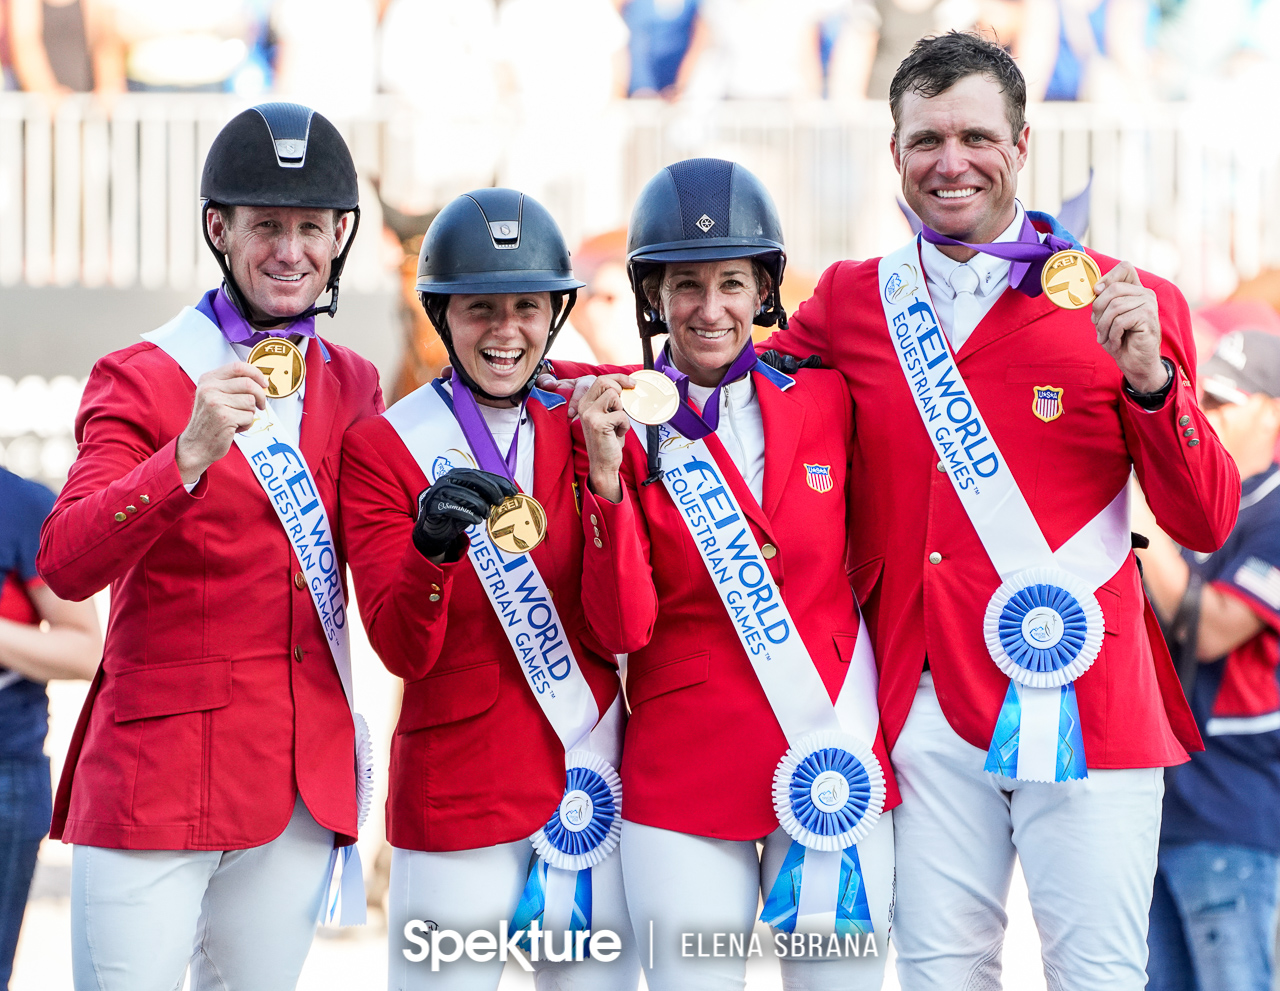 Earchphoto - The US Show Jumping Team on the podium at the 2018 World Equestrian Games in Tryon NC